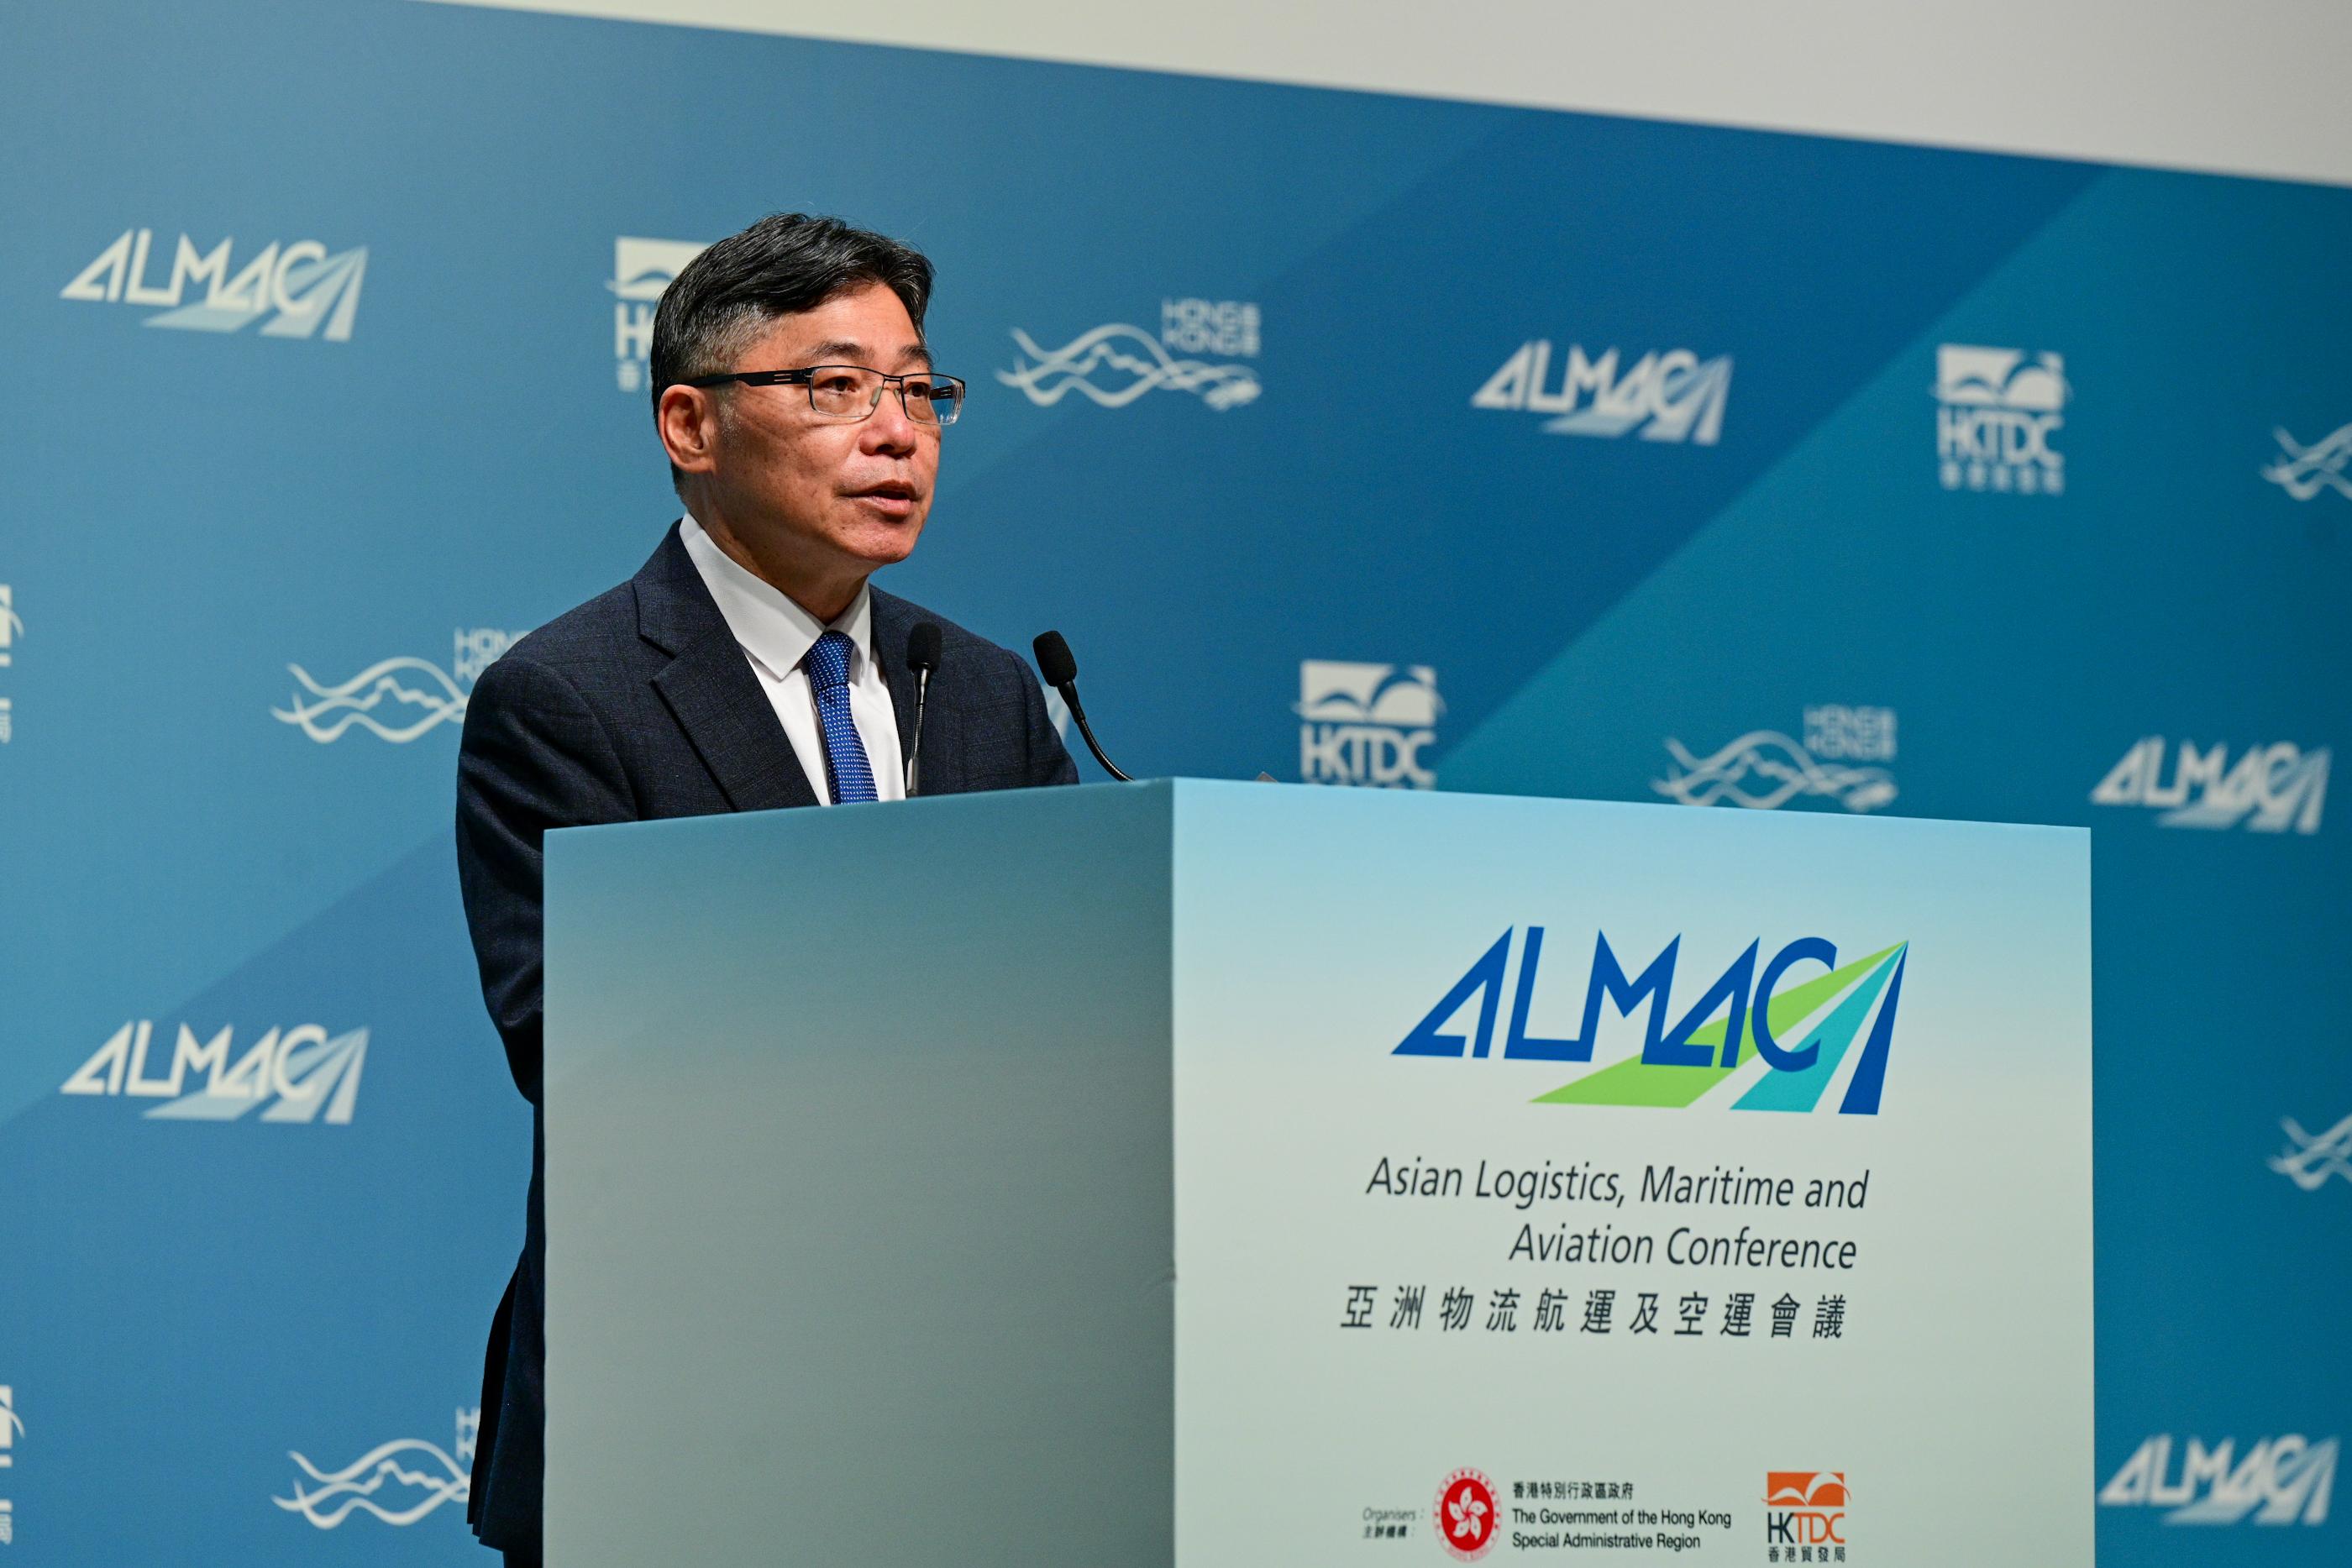 The Secretary for Transport and Logistics, Mr Lam Sai-hung, speaks at the Asian Logistics, Maritime and Aviation Conference today (November 22).